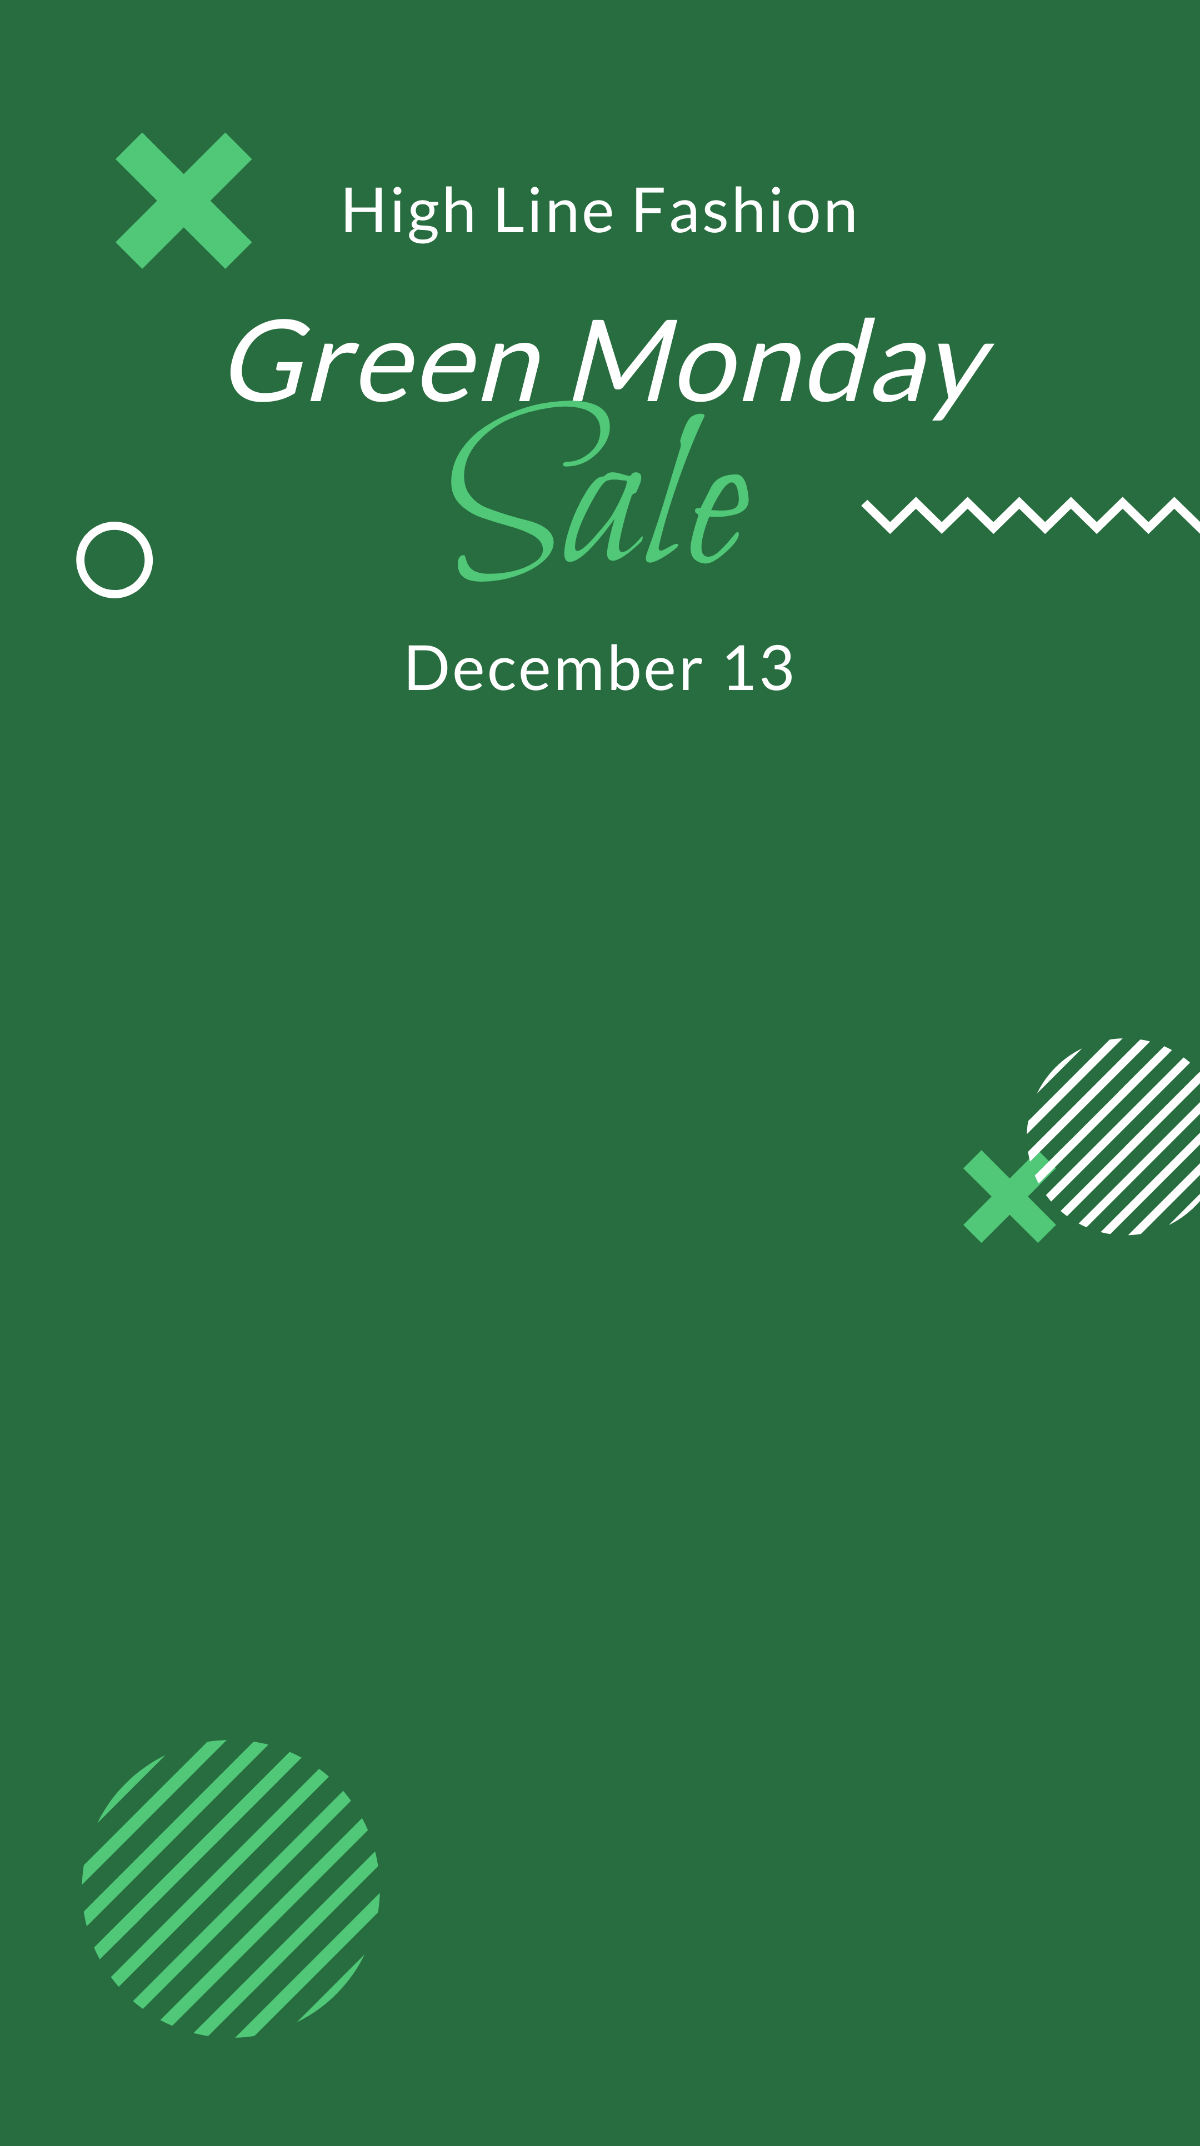 Green Monday Sale Snapchat Geofilter Template